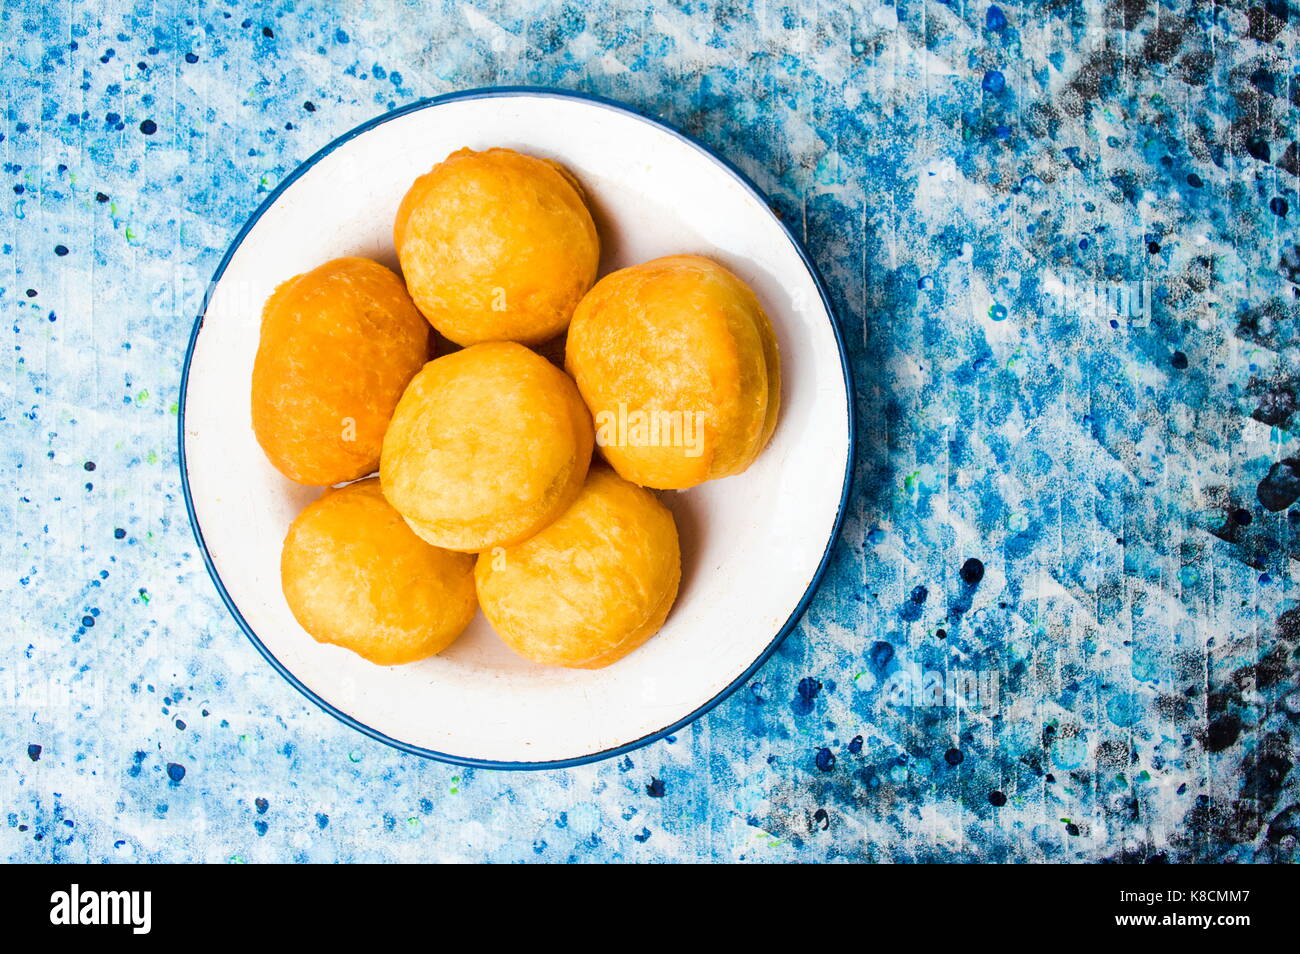 Homemade doughnuts covered with sugar powder on a plate Stock Photo